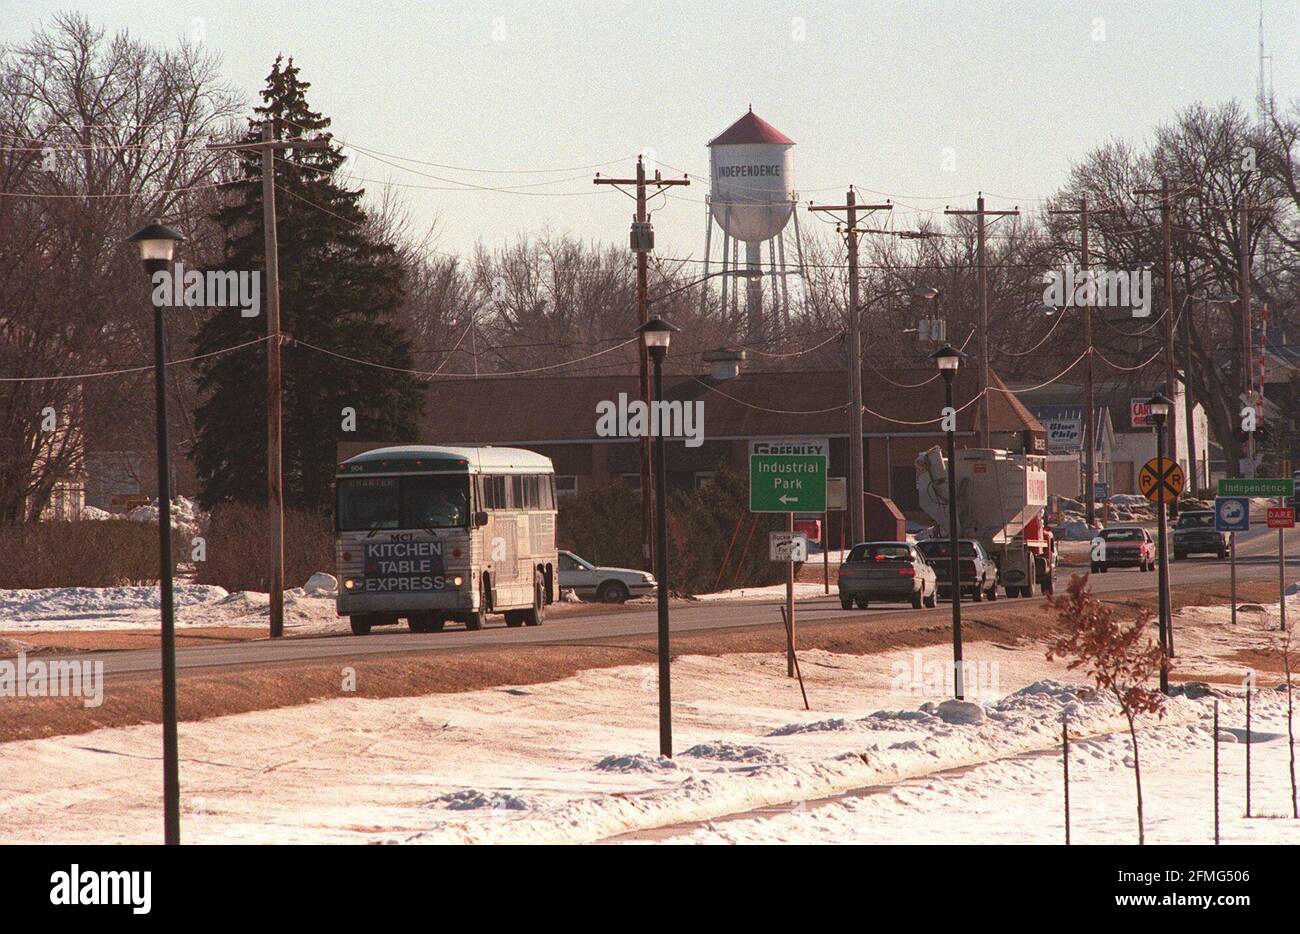 PHIL GRAMM'S CAMPAIGN BUS STEAMS UP HIGHWAY 150 NORTH THROUGH THE TOWN OF INDEPENDENCE, EASTERN IOWA, A TYPICAL MID WEST TOWN.ALTHOUGH TRAILING IN THE POLLS GRAMM IS HOPING FOR STRONG GRASS ROOT SUPPORT IN MONDAYS IOWA CAUCUS........................... PHOTO BRIAN HARRIS 9 FEB 1996 Stock Photo